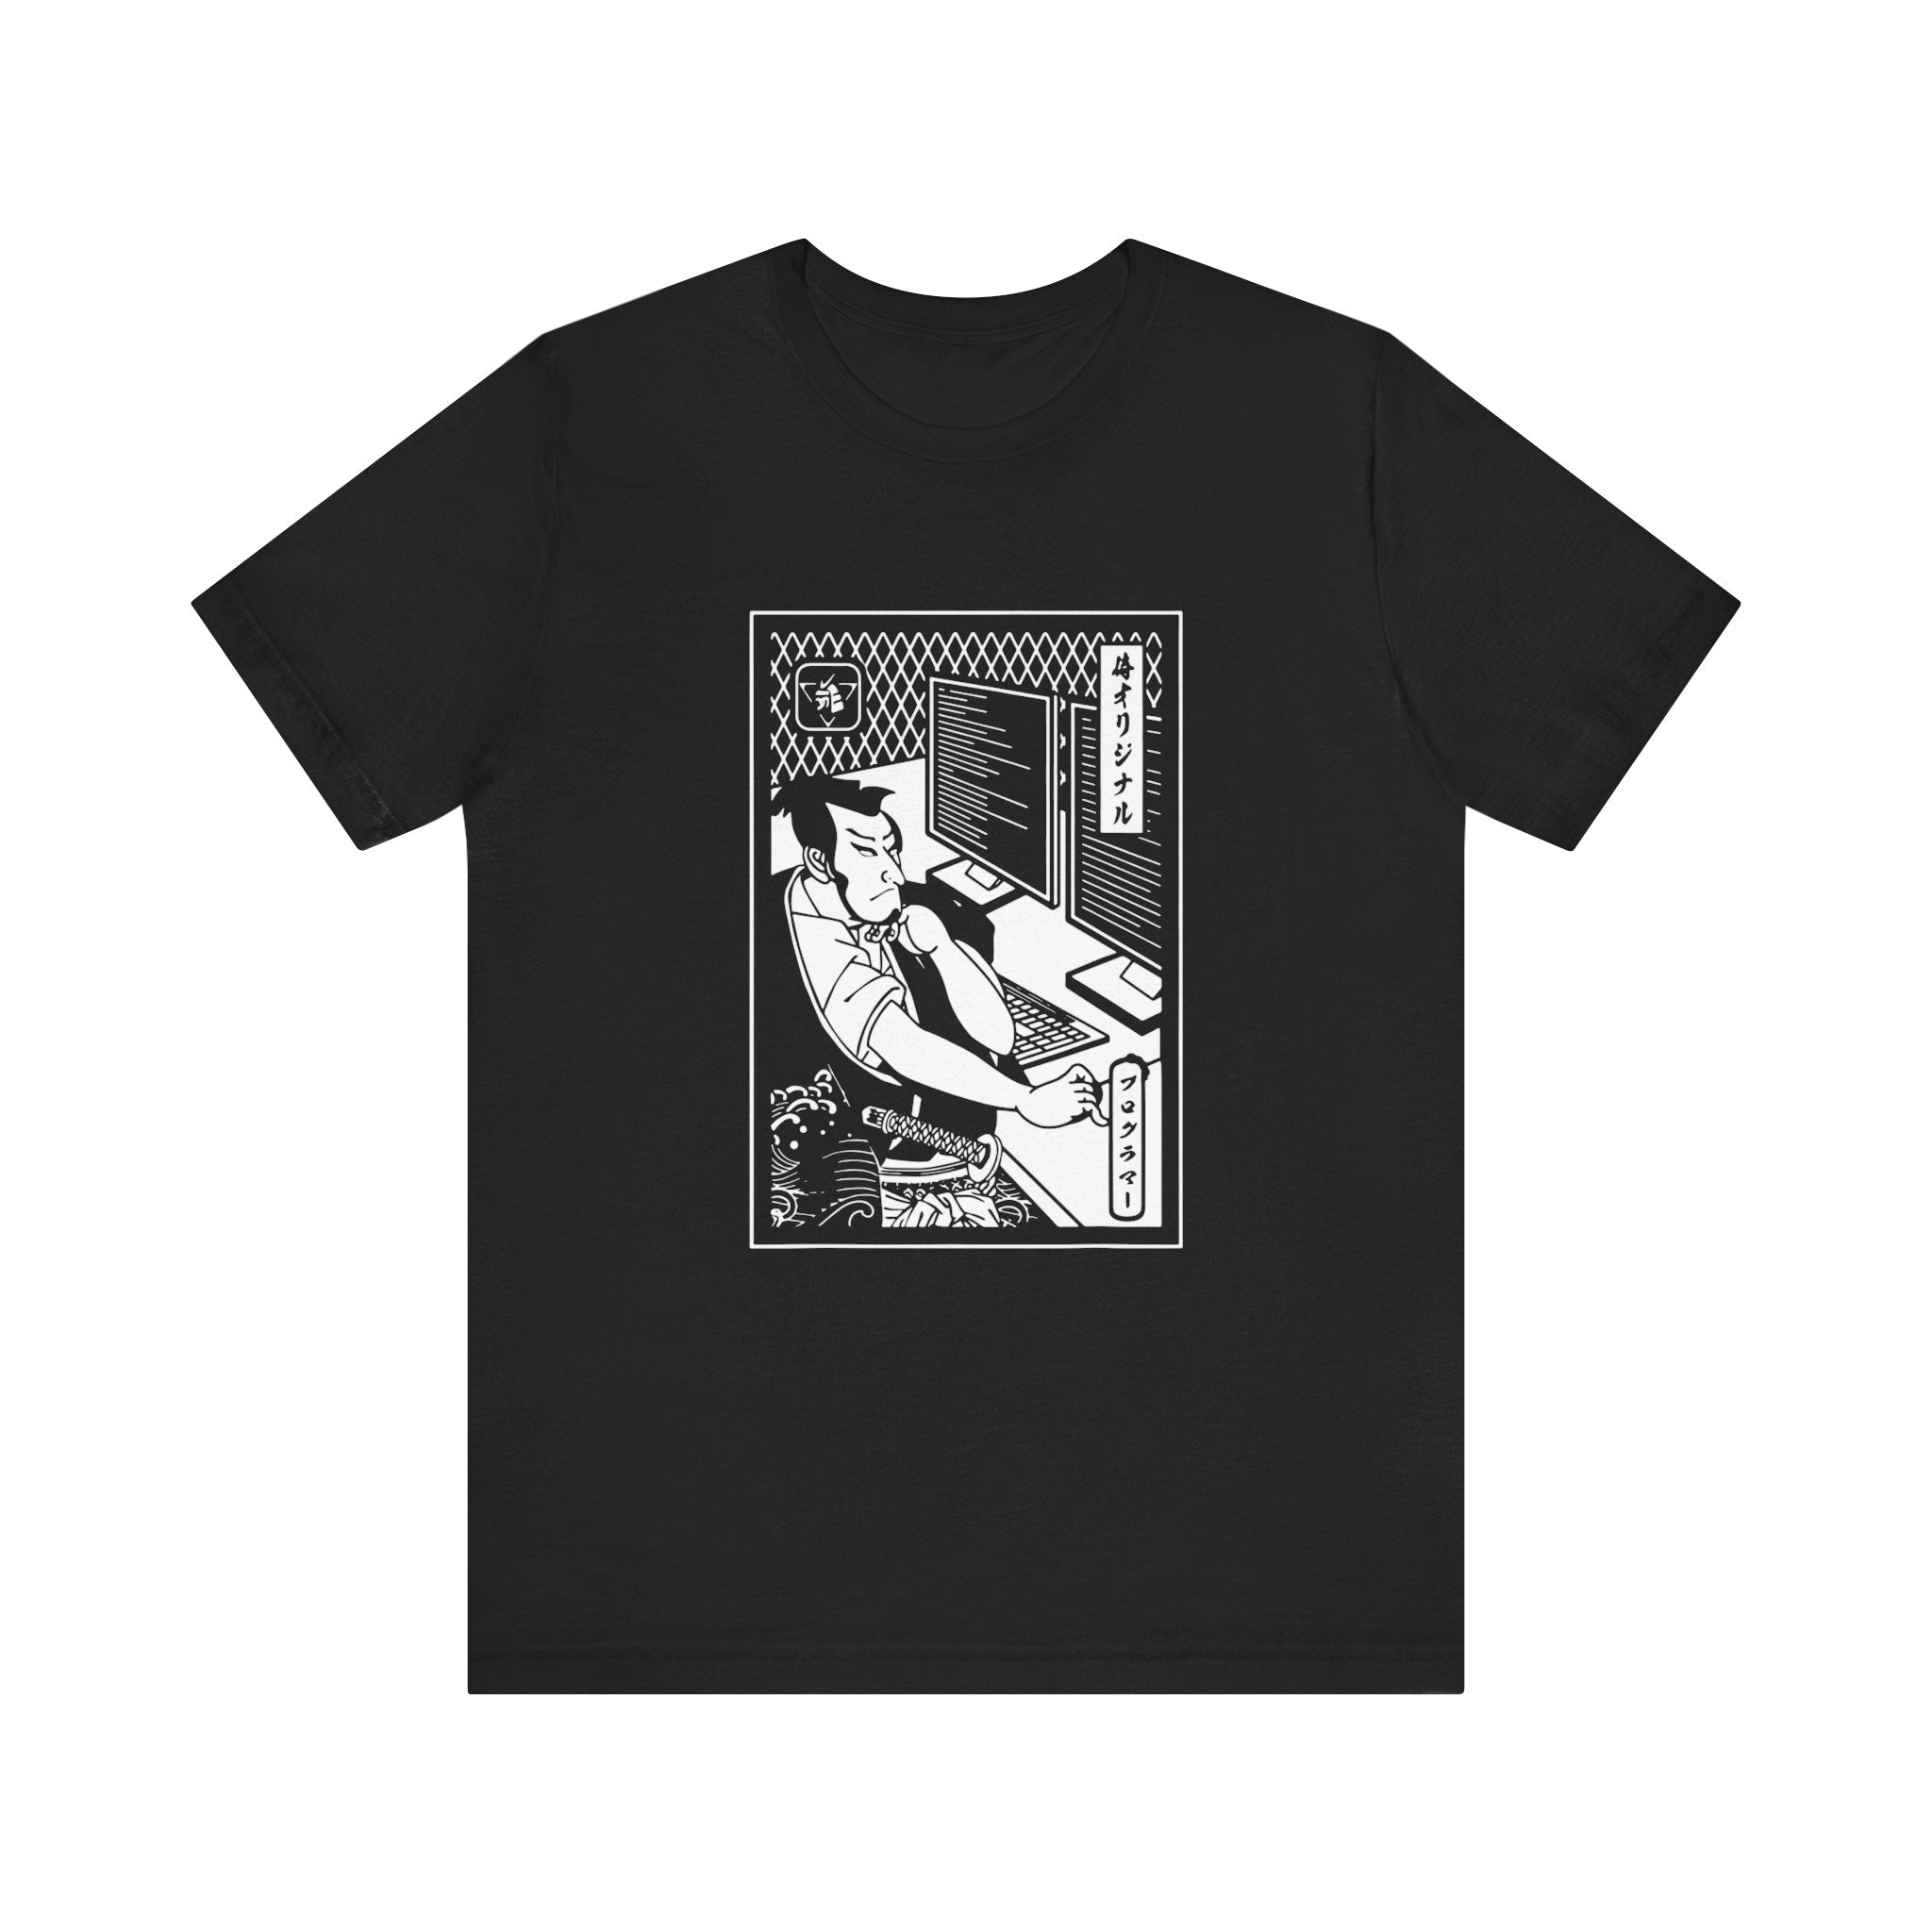 Coding Samurai T-Shirt featuring a graphic design of a man working at a computer desk with papers scattered around and a cityscape visible through a window behind him, crafted from breathable fabric.